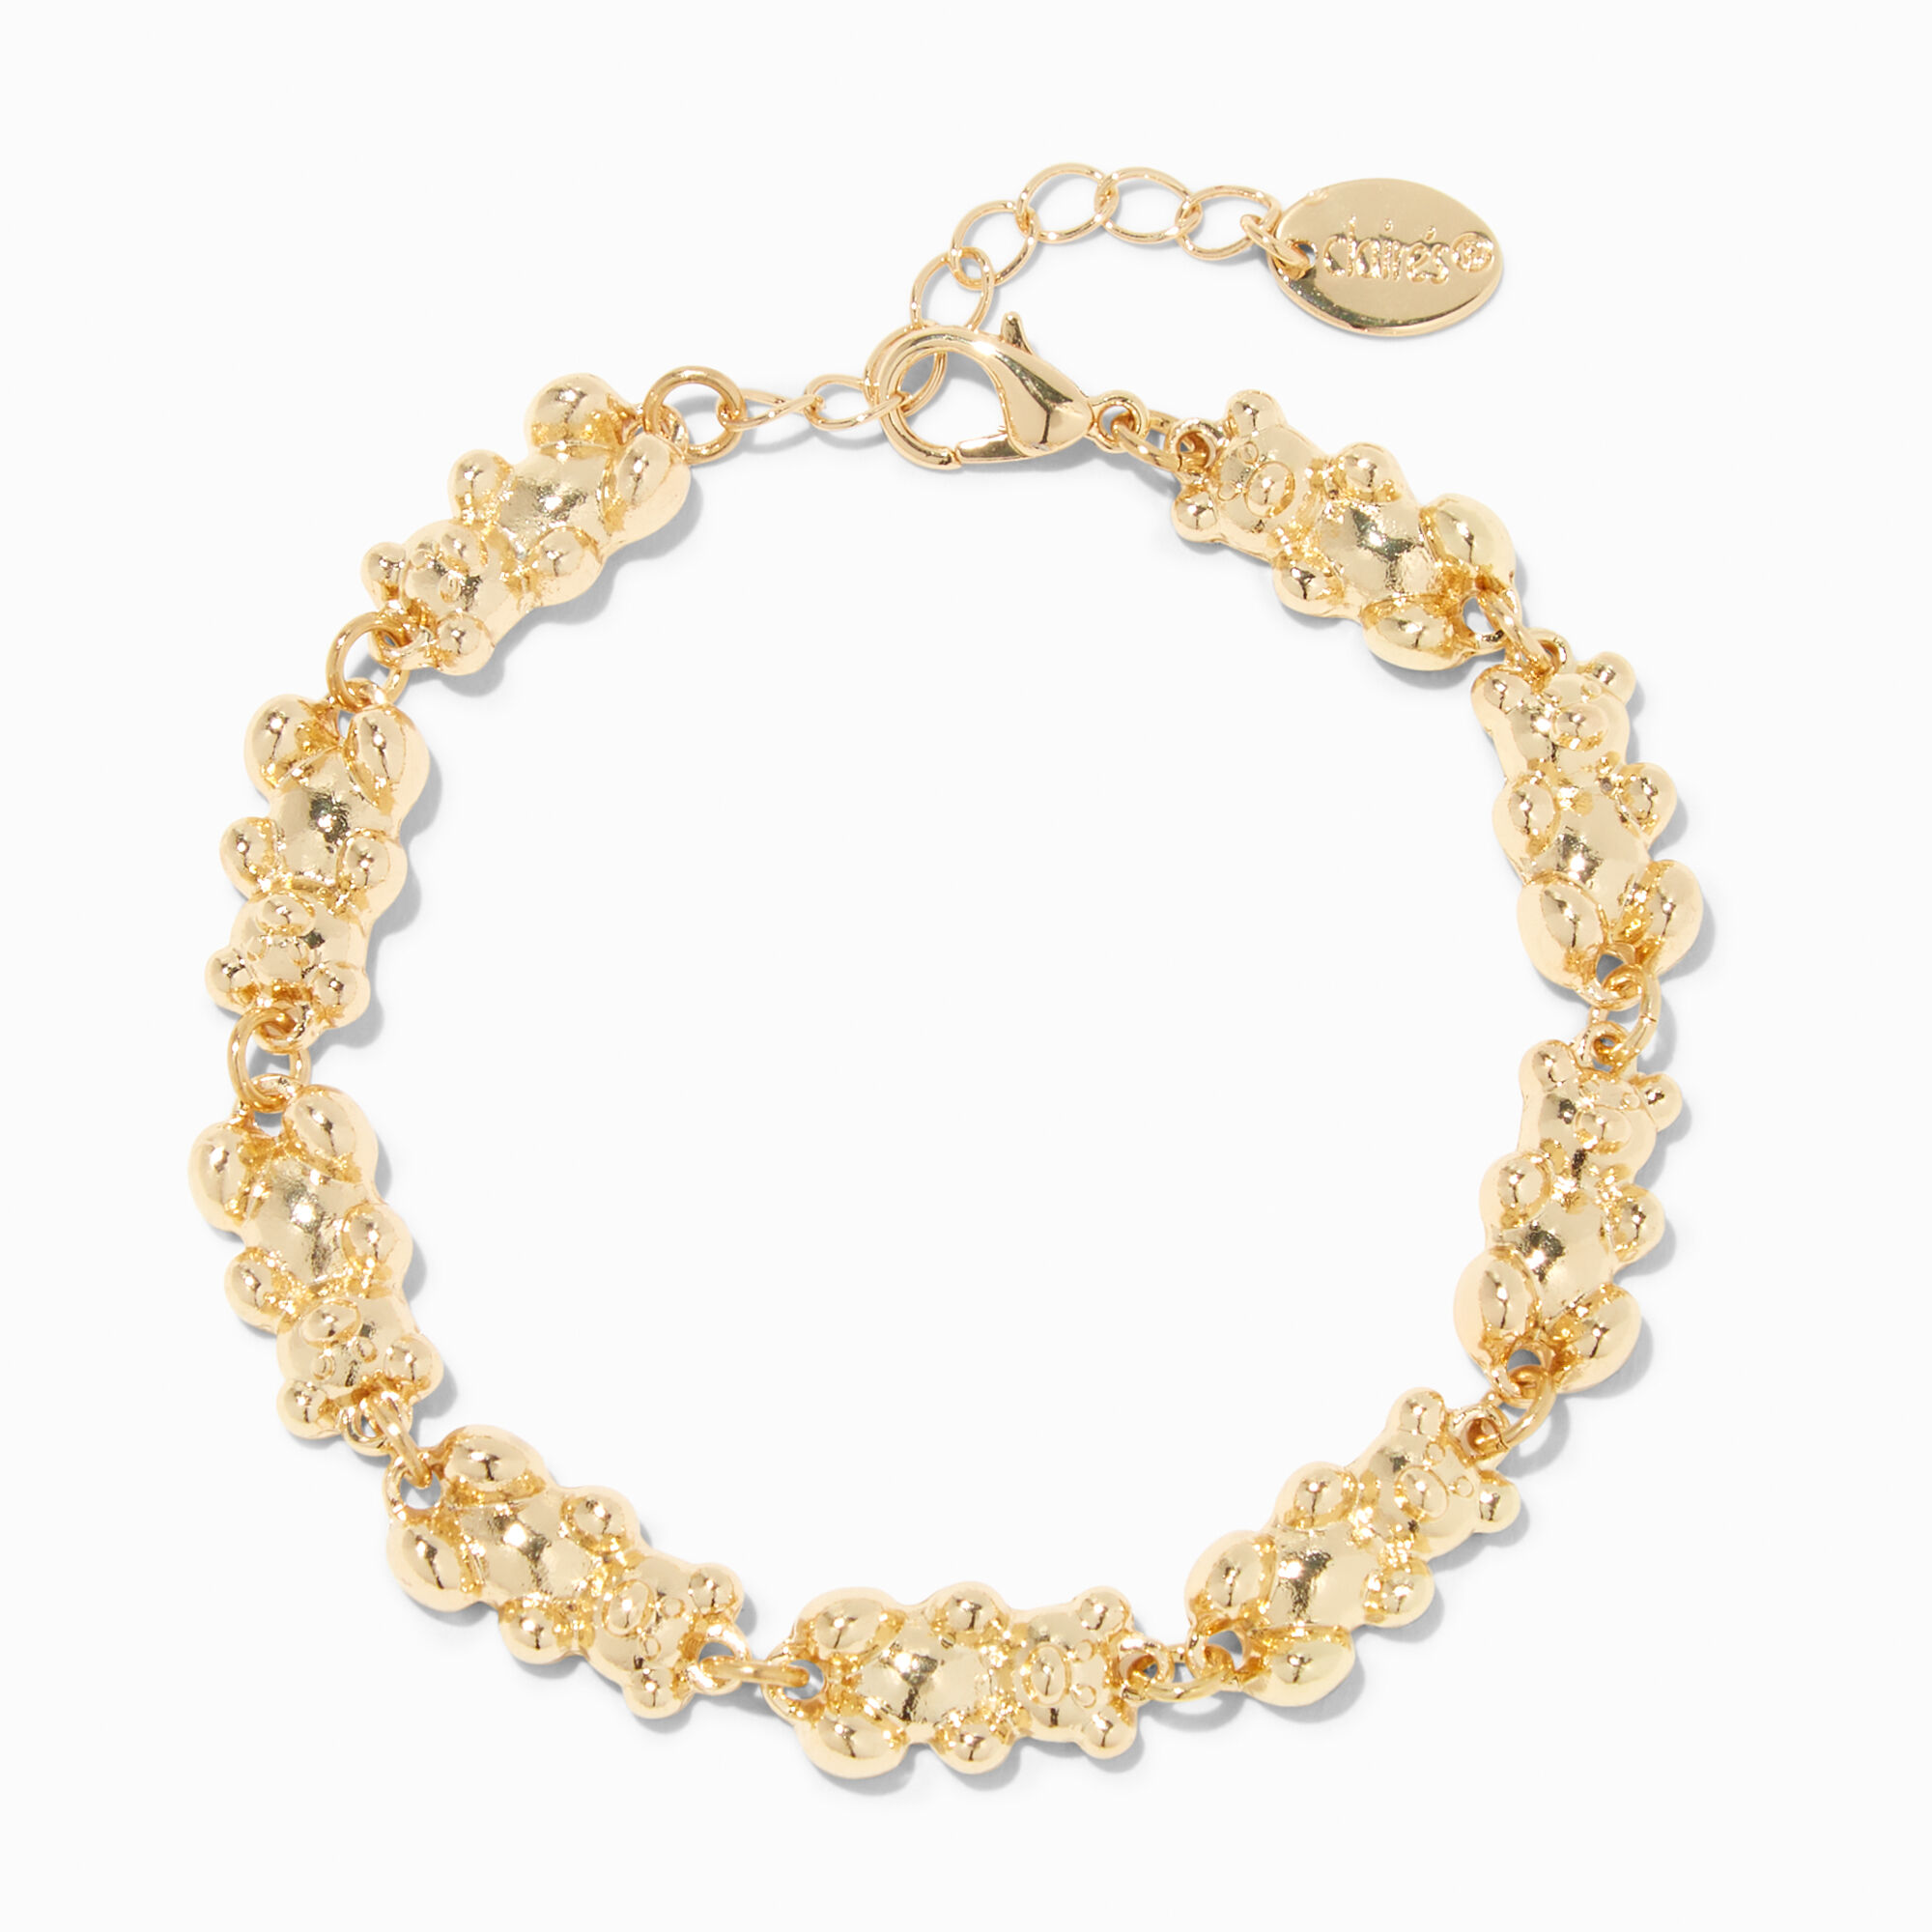 View Claires Tone Teddy Bear Chain Bracelet Gold information